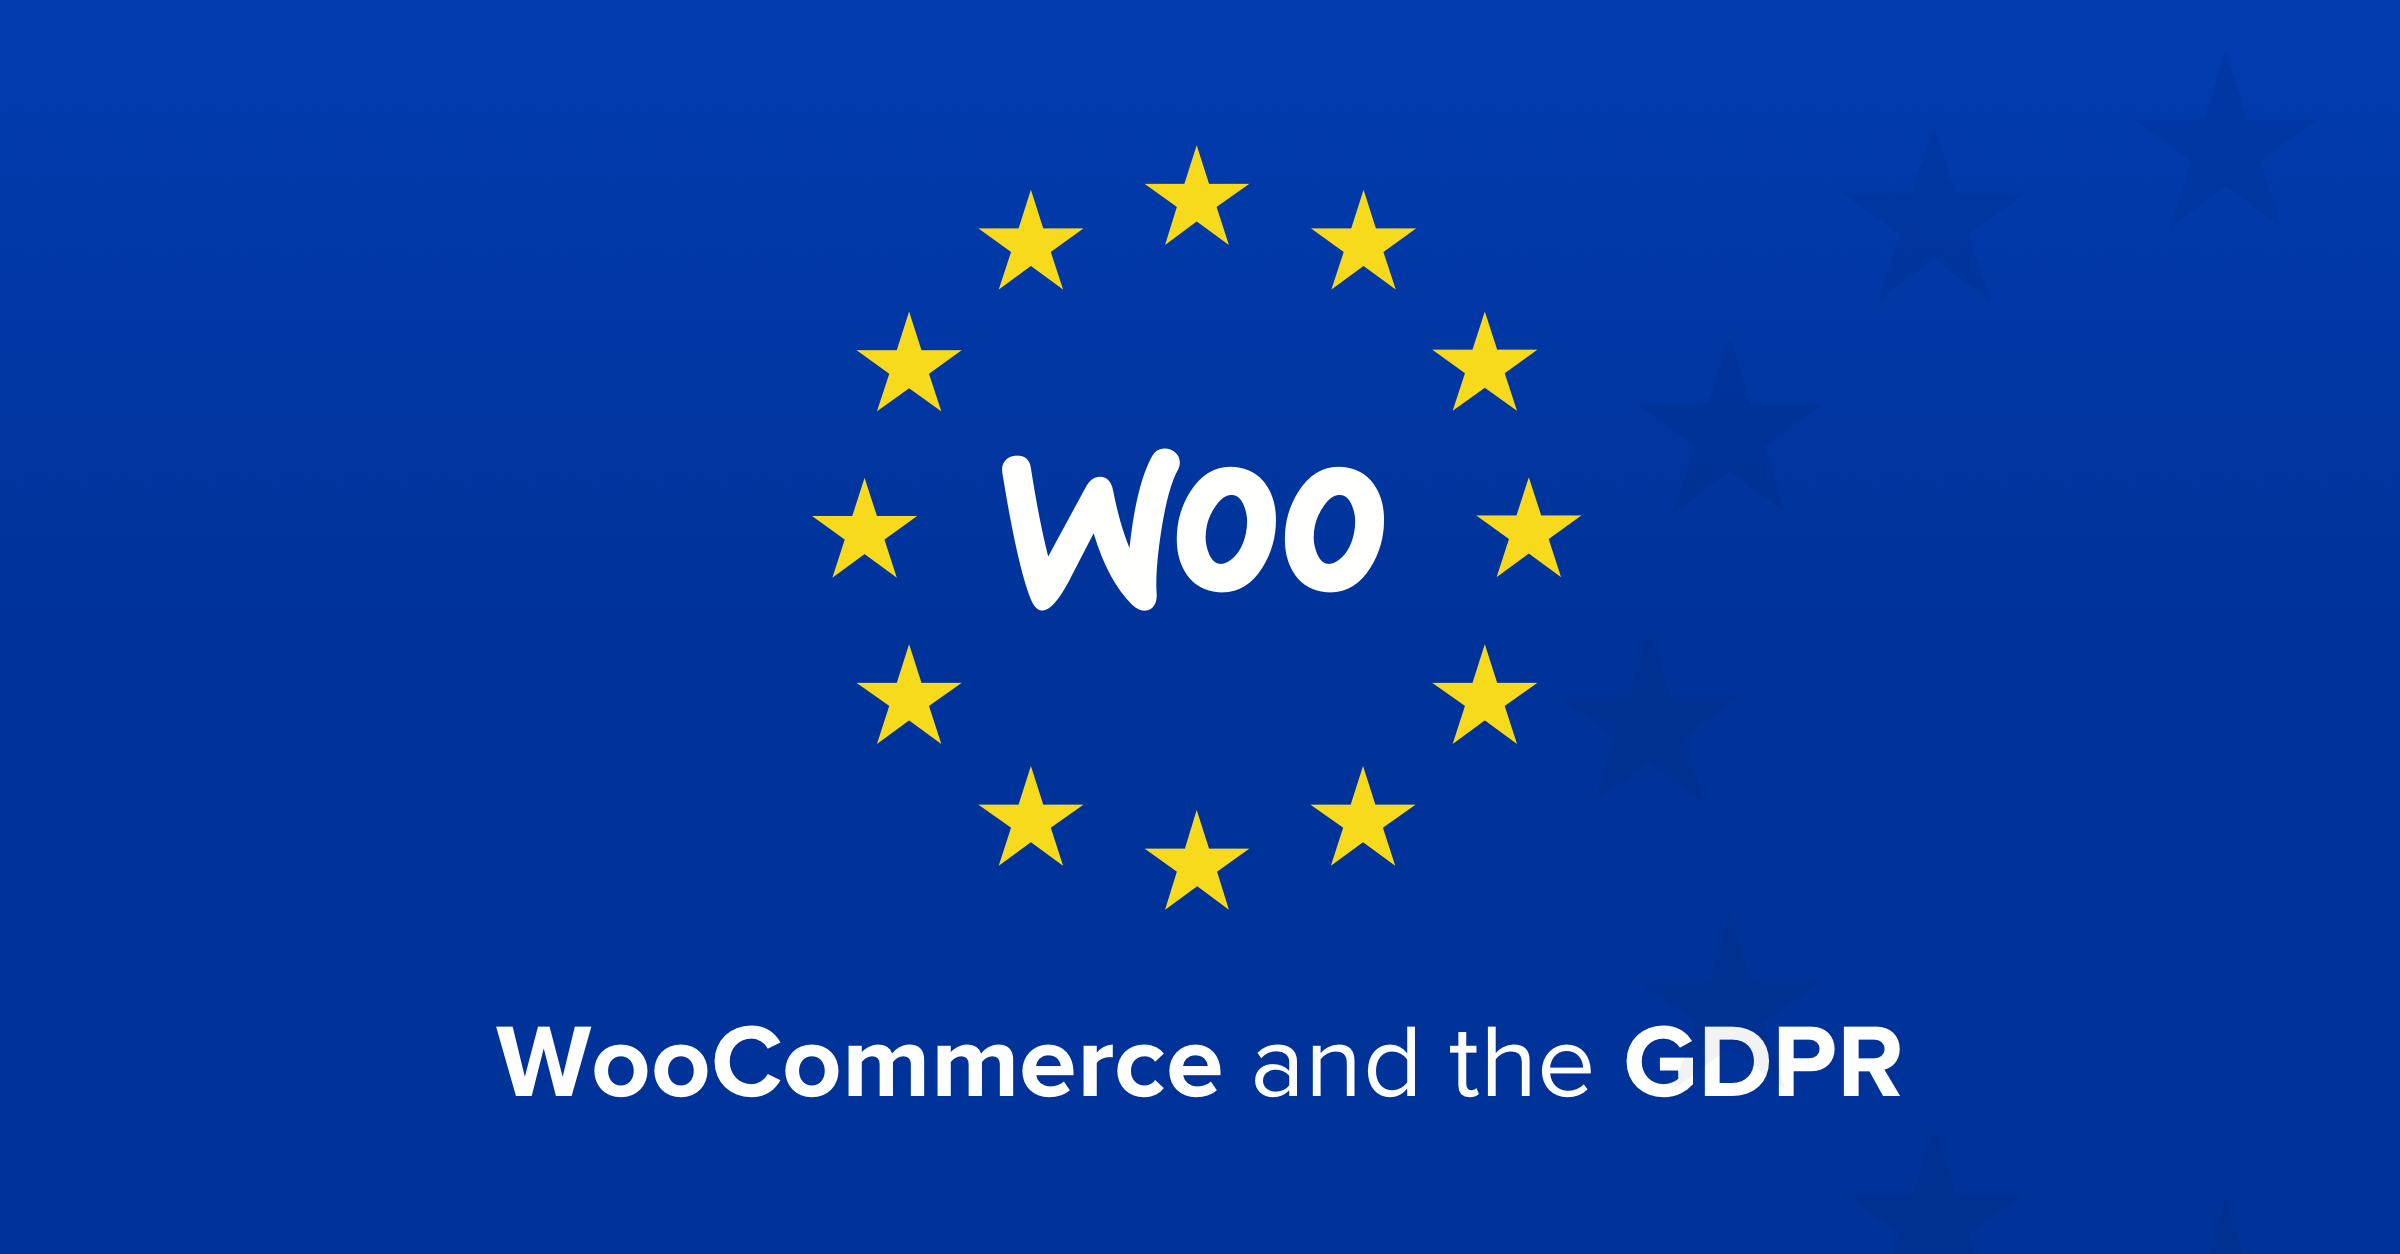 WooCommerce and GDPR: Get tools and resources